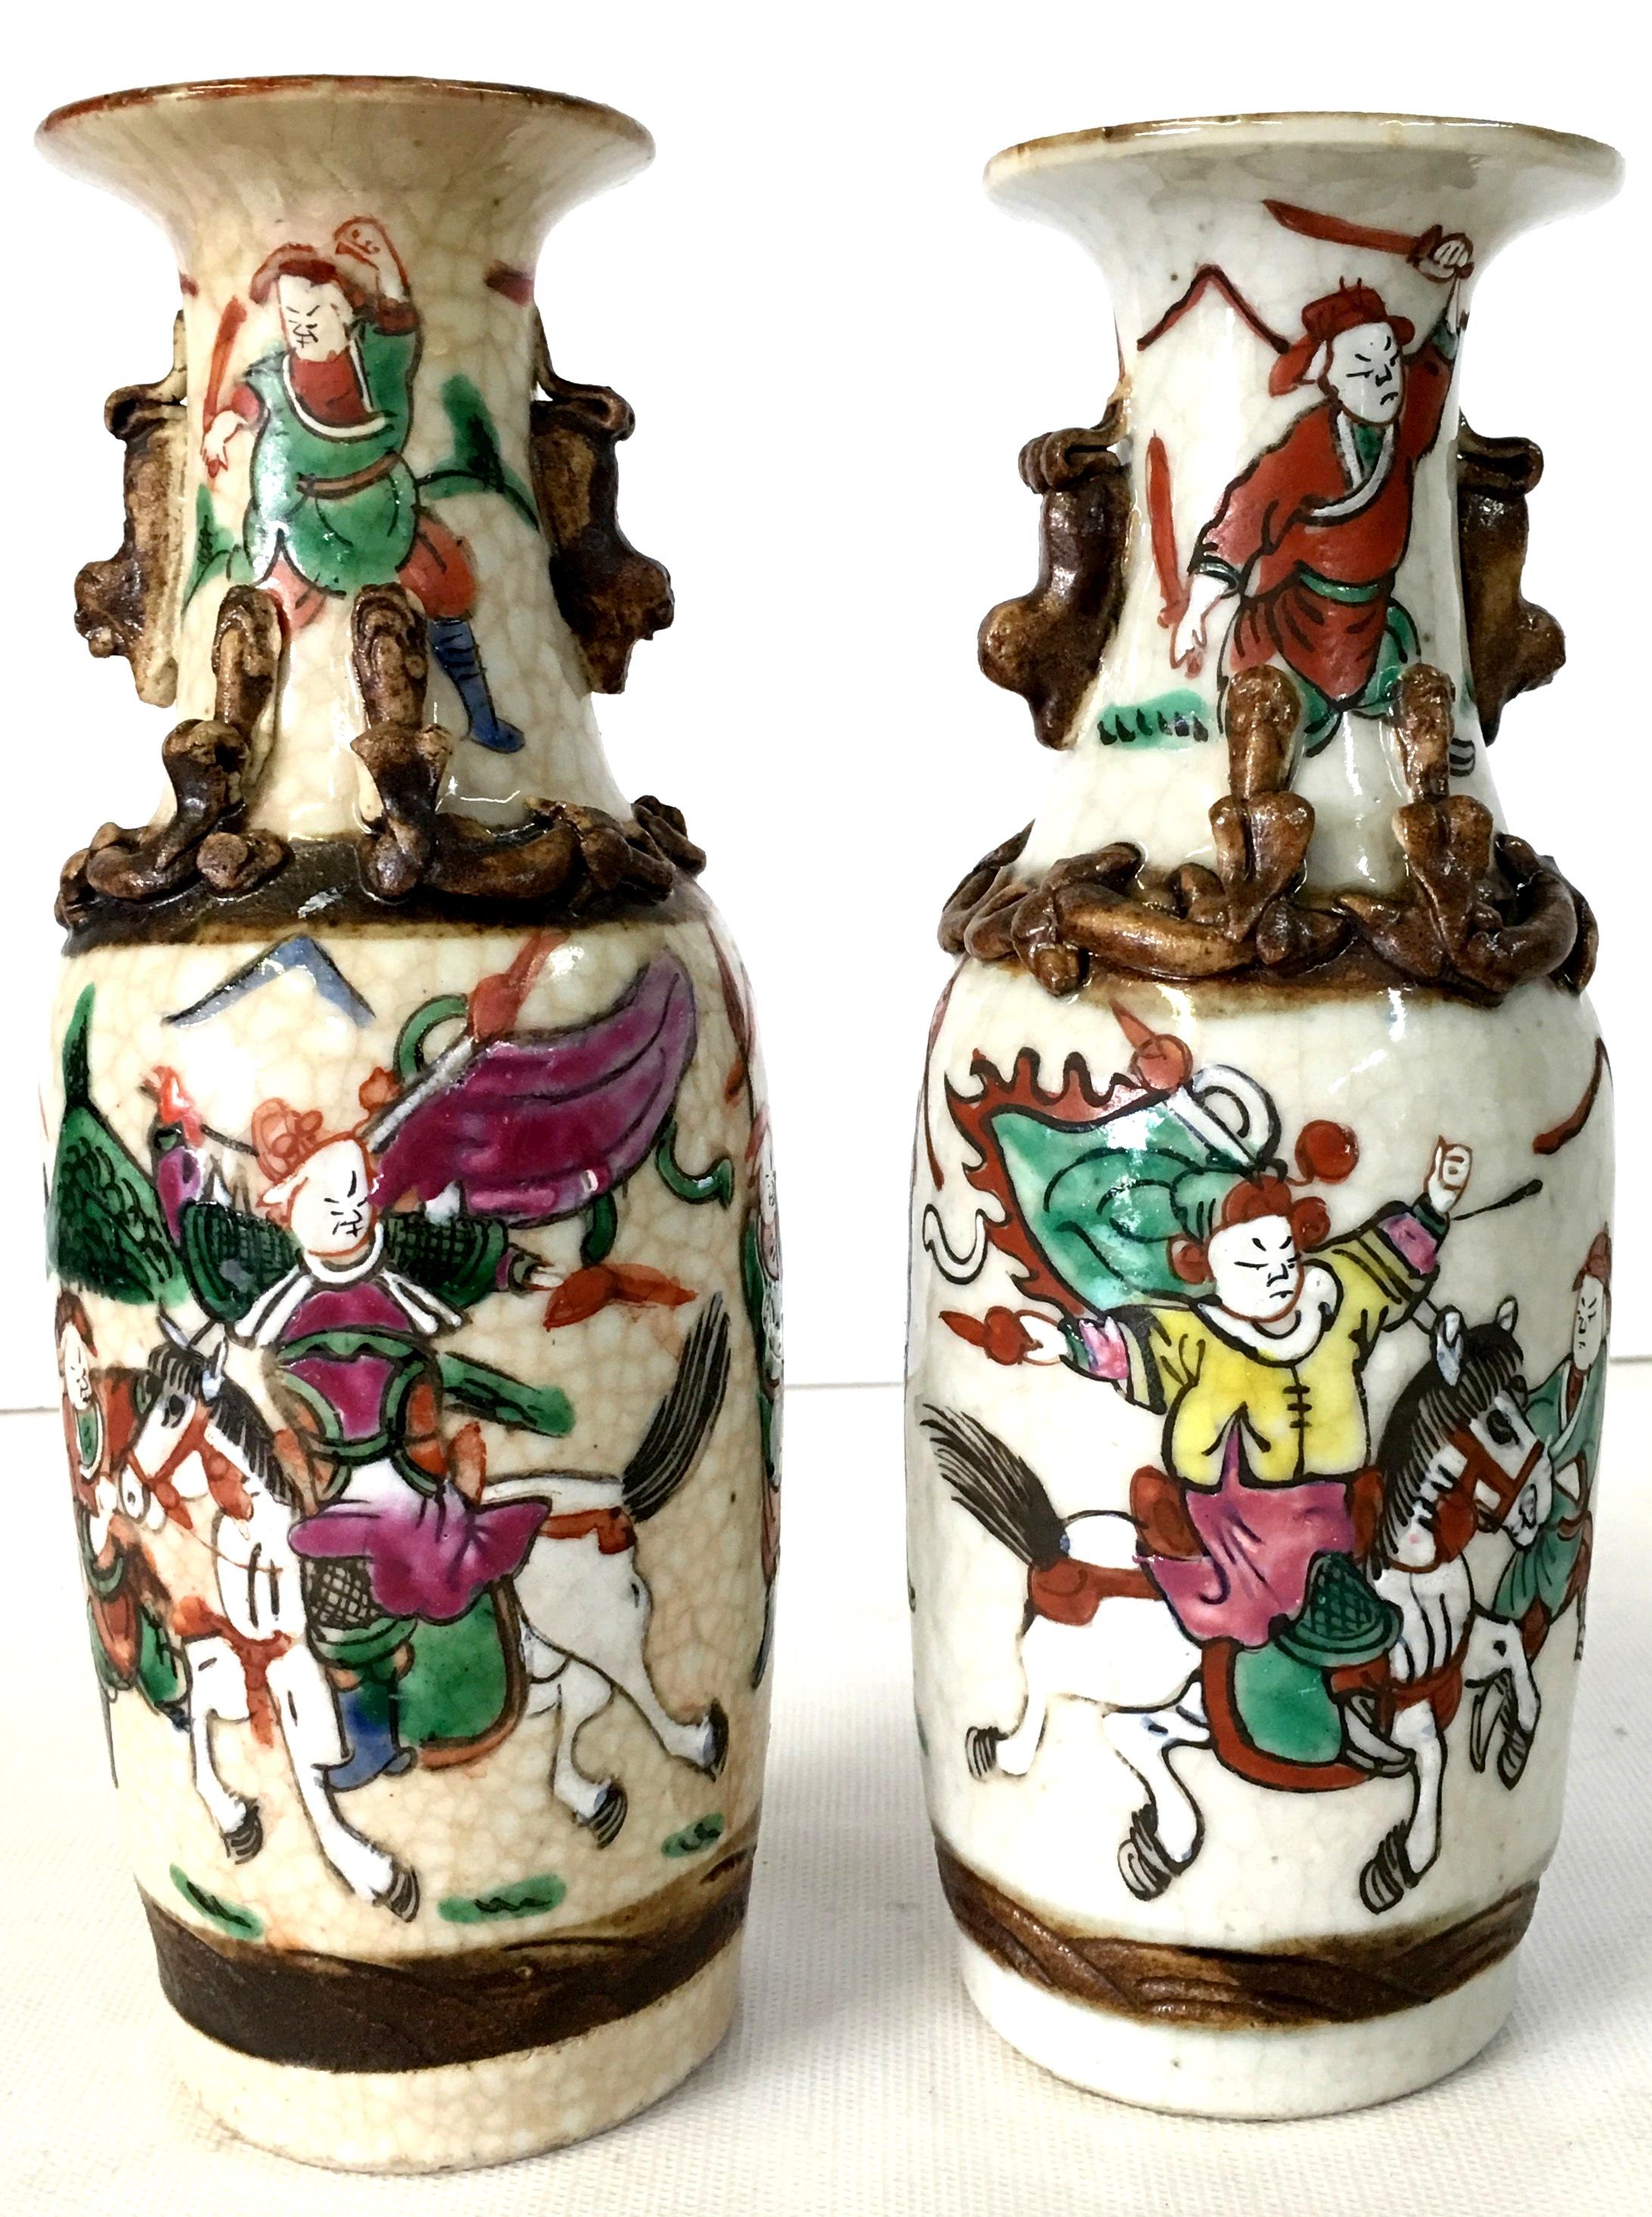 19th Century Antique Japanese Pair Of crackle ware poly chrome warrior motif vases with high relief foo lions. Each piece is signed on the underside and have slight variances.
Hand-painted in purple, green, orange, white, black and blue with brown